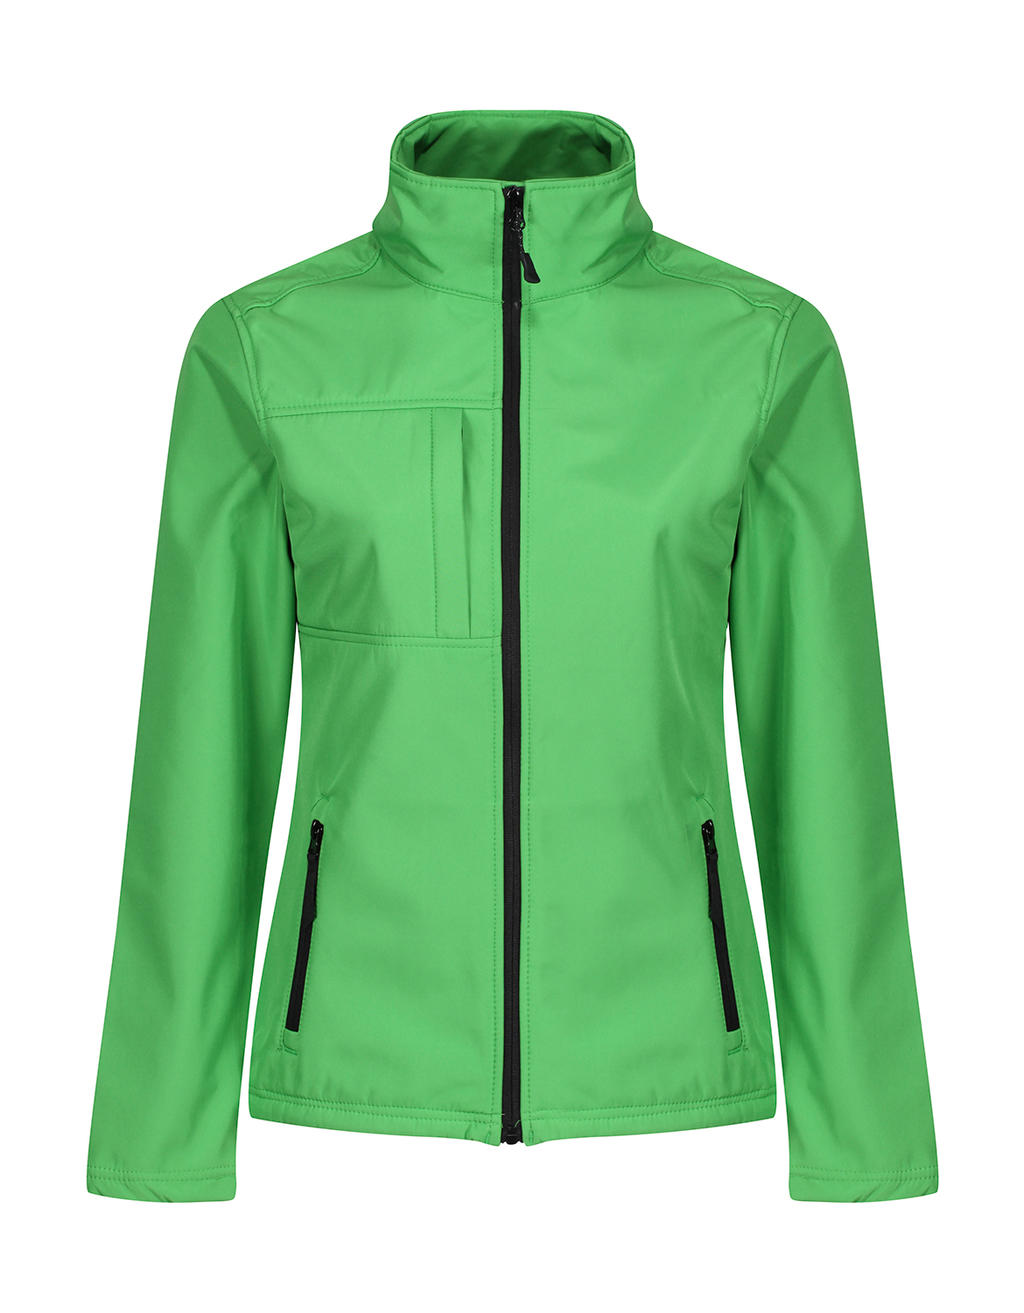  Womens Octagon II Softshell in Farbe Extreme Green/Black